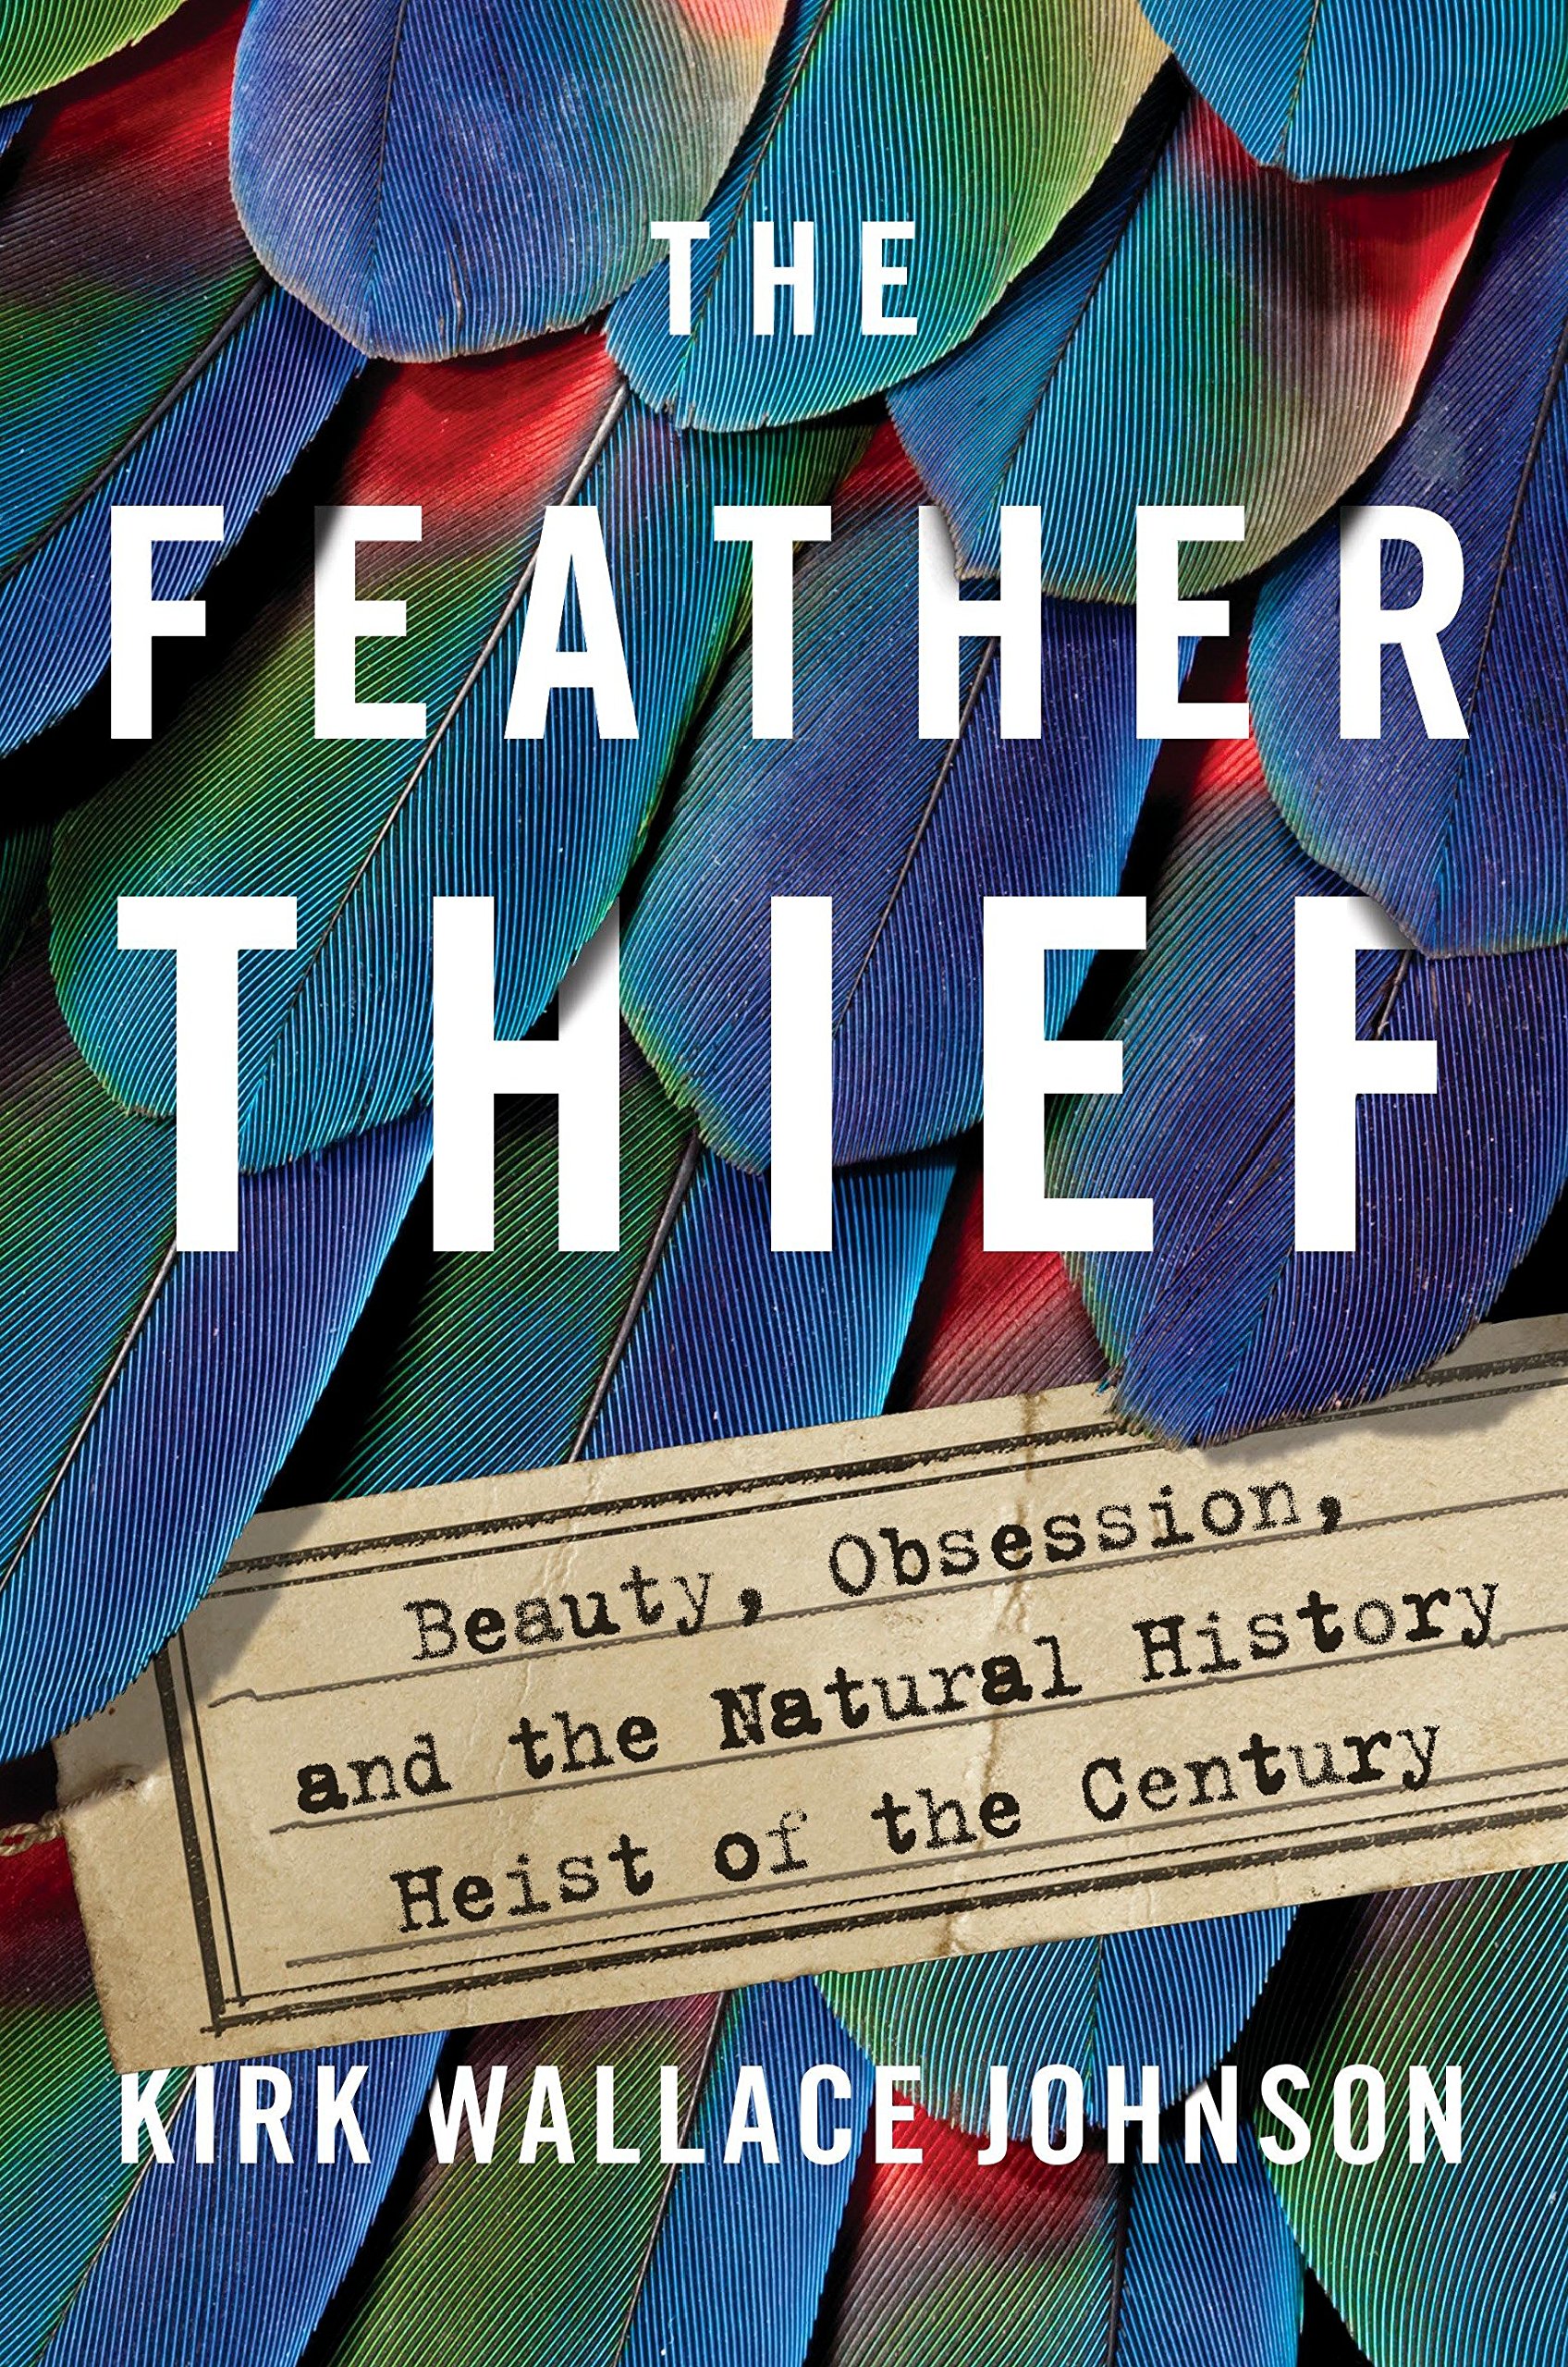 The Feather Thief by Kirk W. Johnson